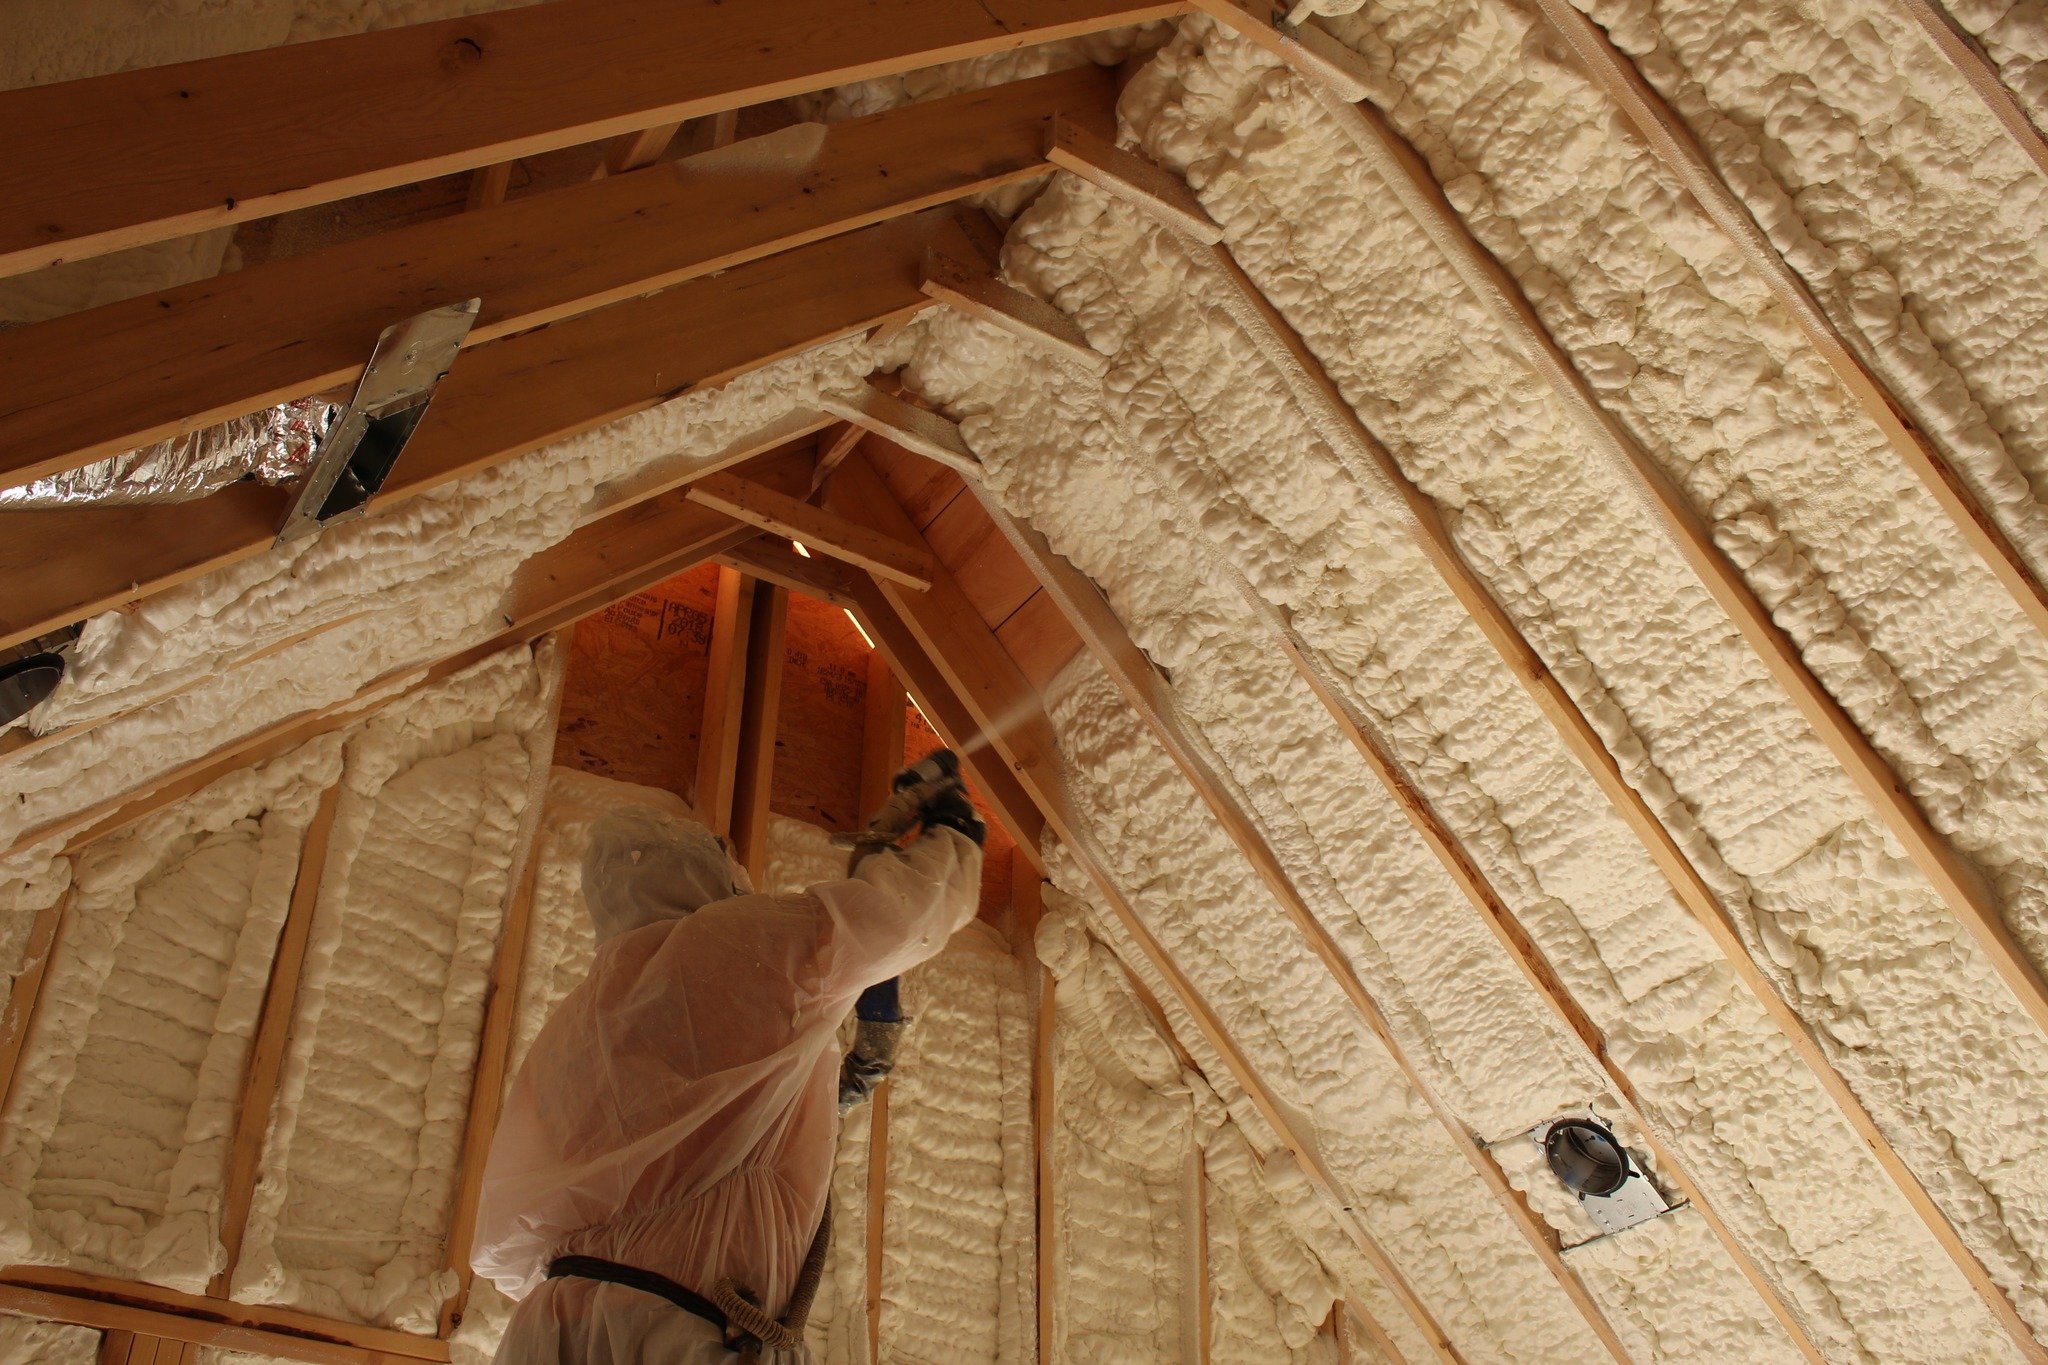 🌬️ Experience Superior Energy Efficiency with Spray Foam Insulation! 🌬️
Ready to reduce your energy bills and live more sustainably? Our spray foam insulation installation does just that! Enjoy unparalleled comfort while saving on heating and cooli